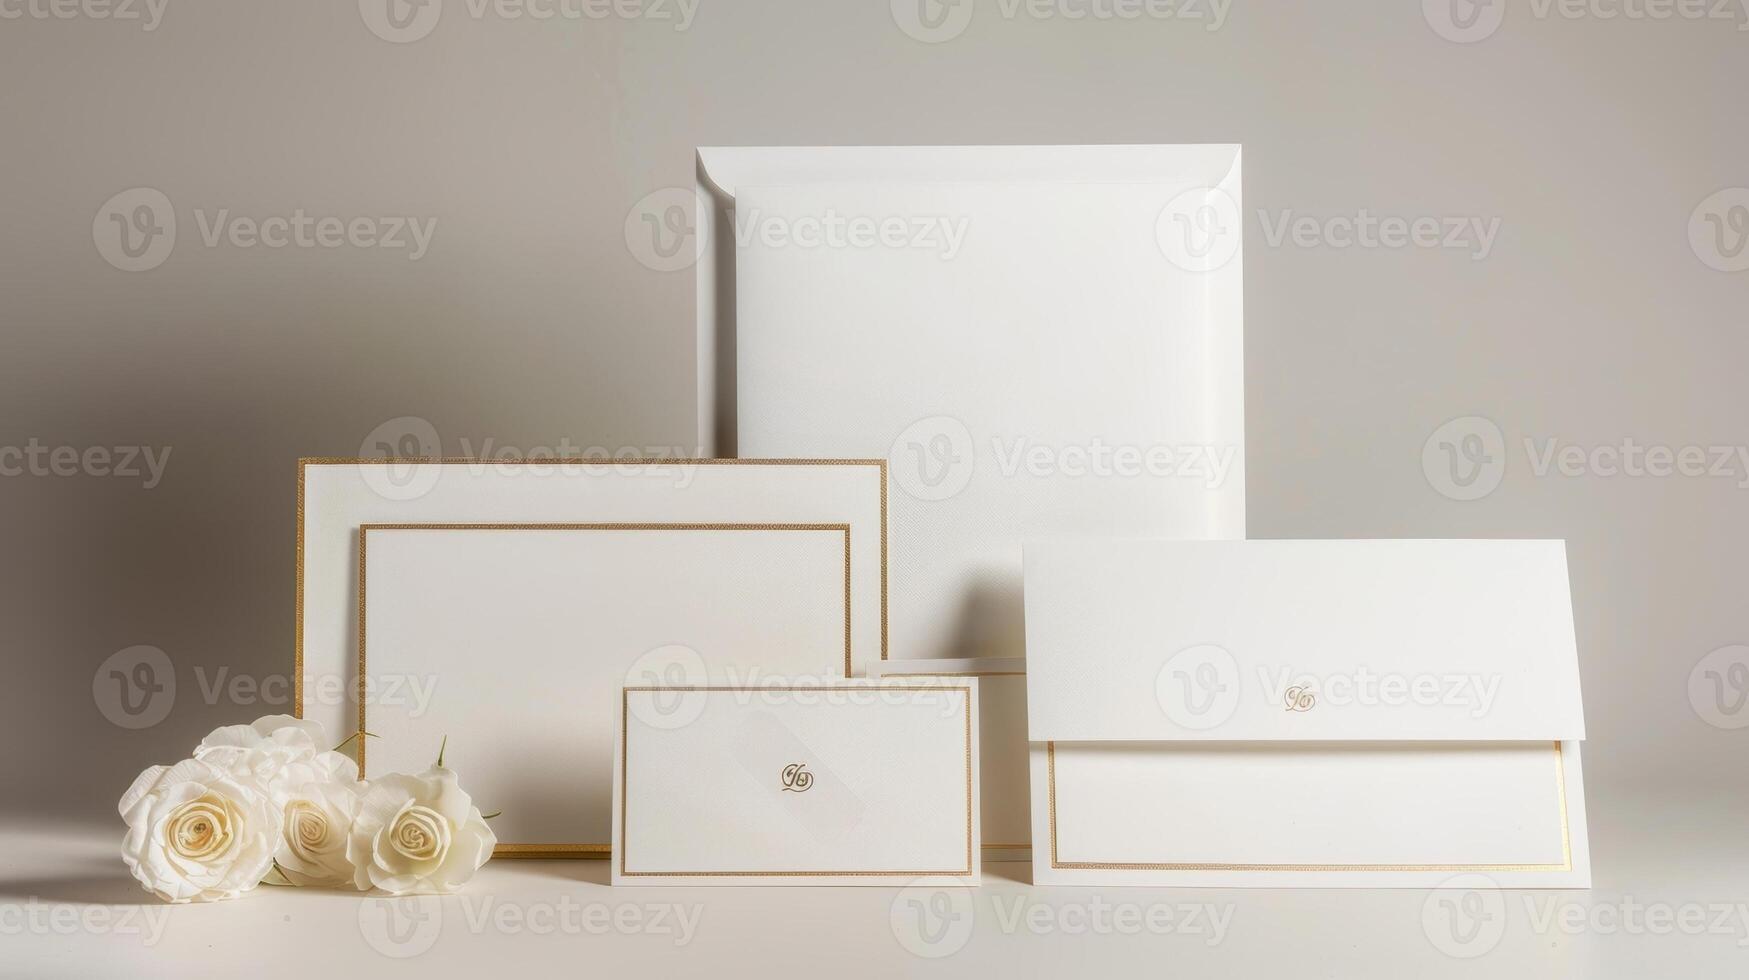 A sophisticated and elegant stationery set with a gold foil border and a custom monogram photo